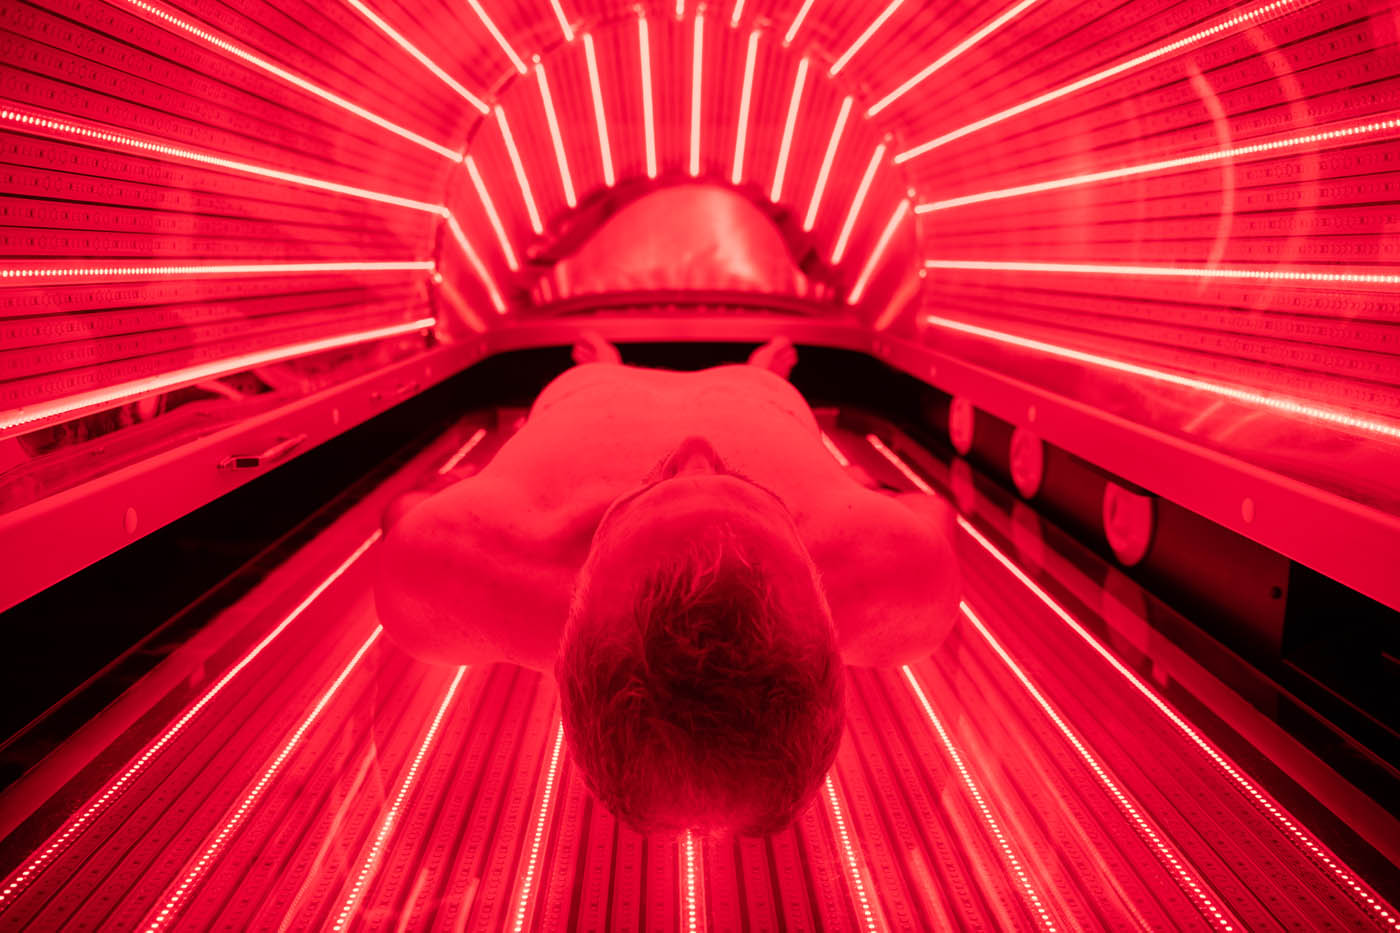 A man getting into a dark pod with bright red light, contact Light Lounge today for your infrared light therapy in Littleton.